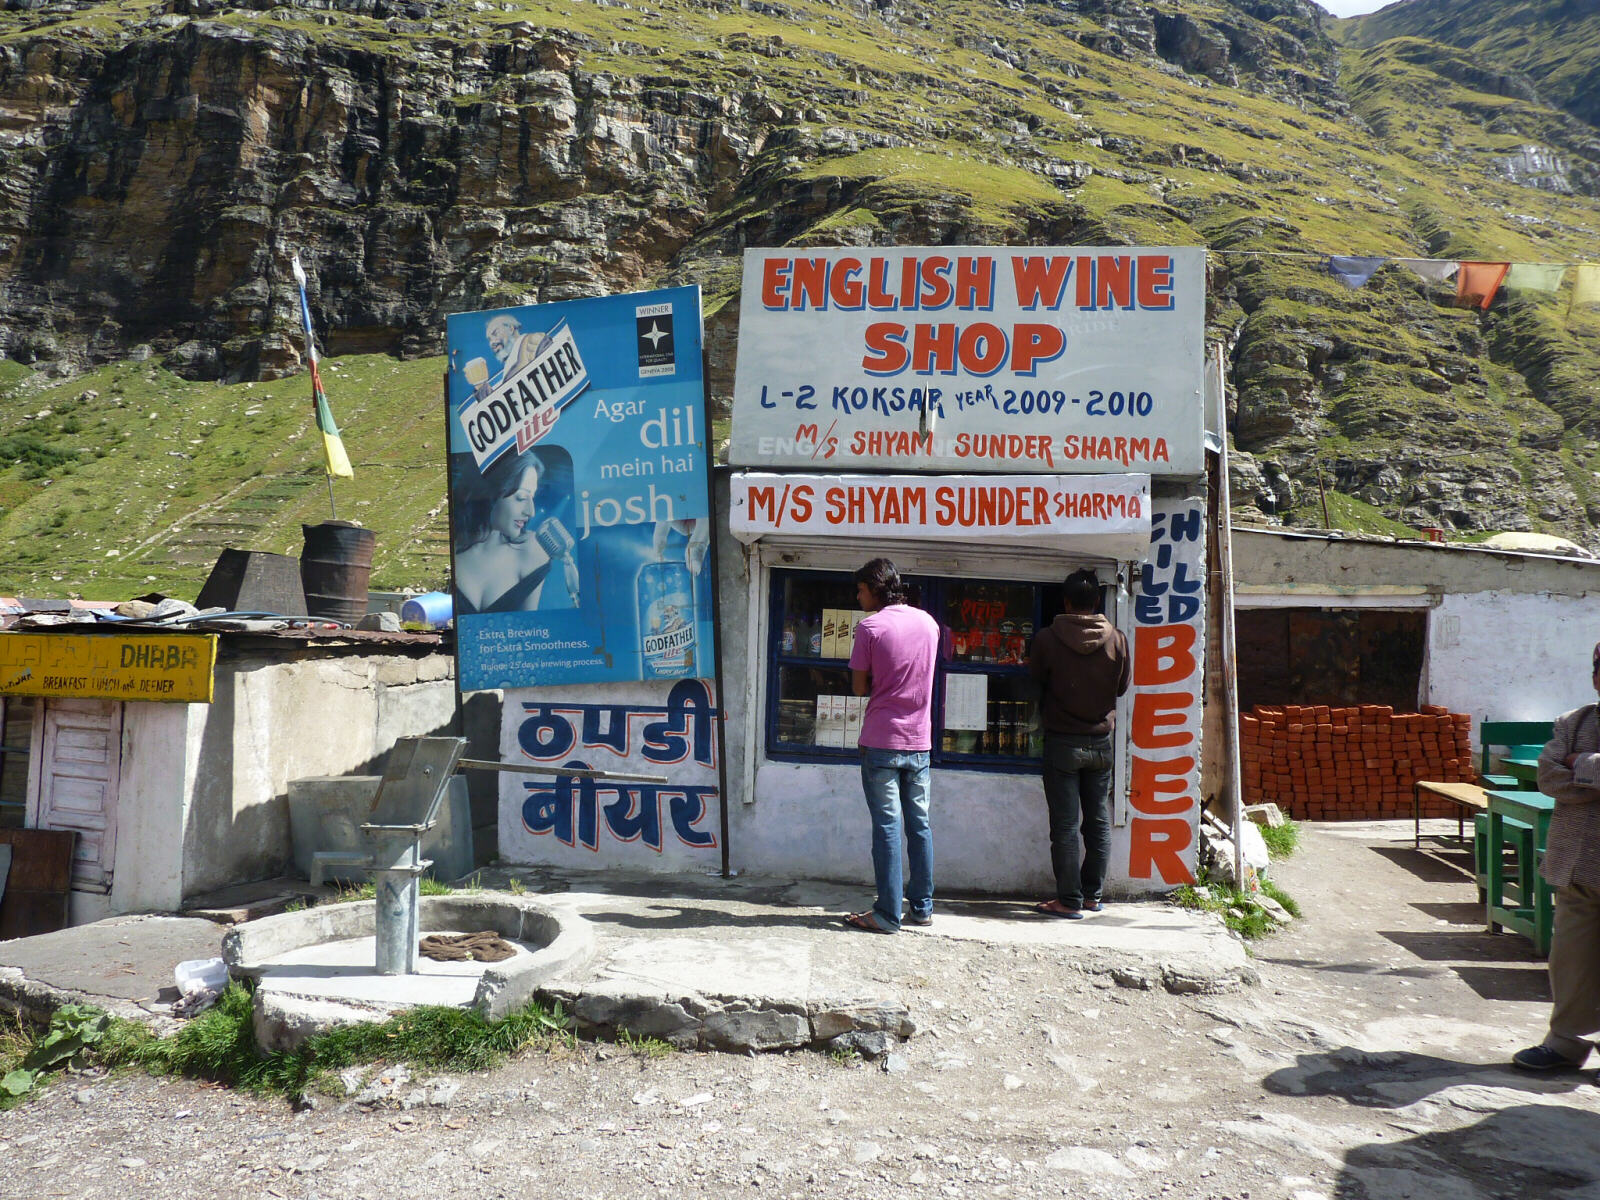 The 'English Wine Shop' on the road from Ladakh to Manali